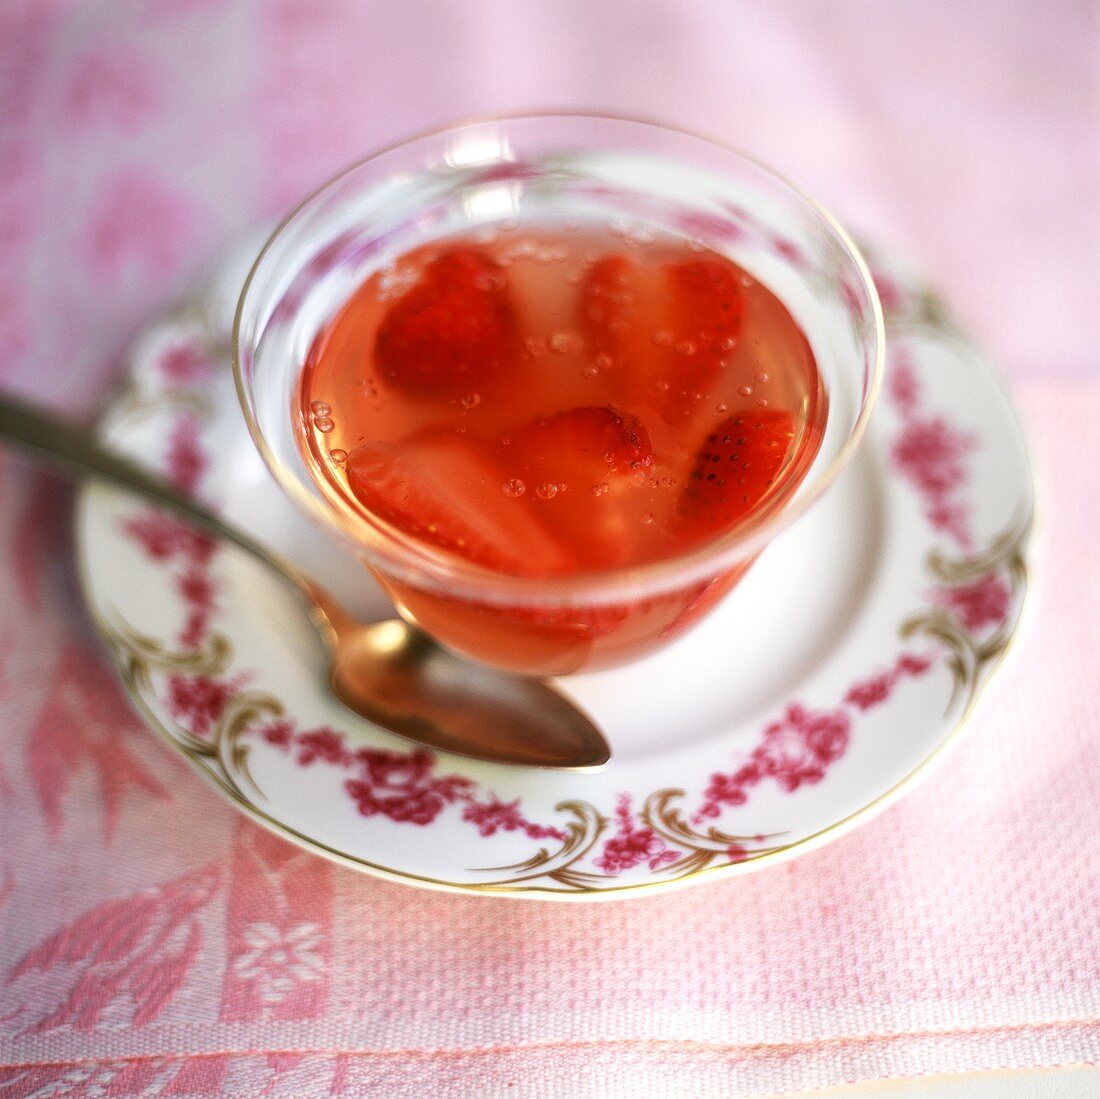 Strawberry jelly in bowl